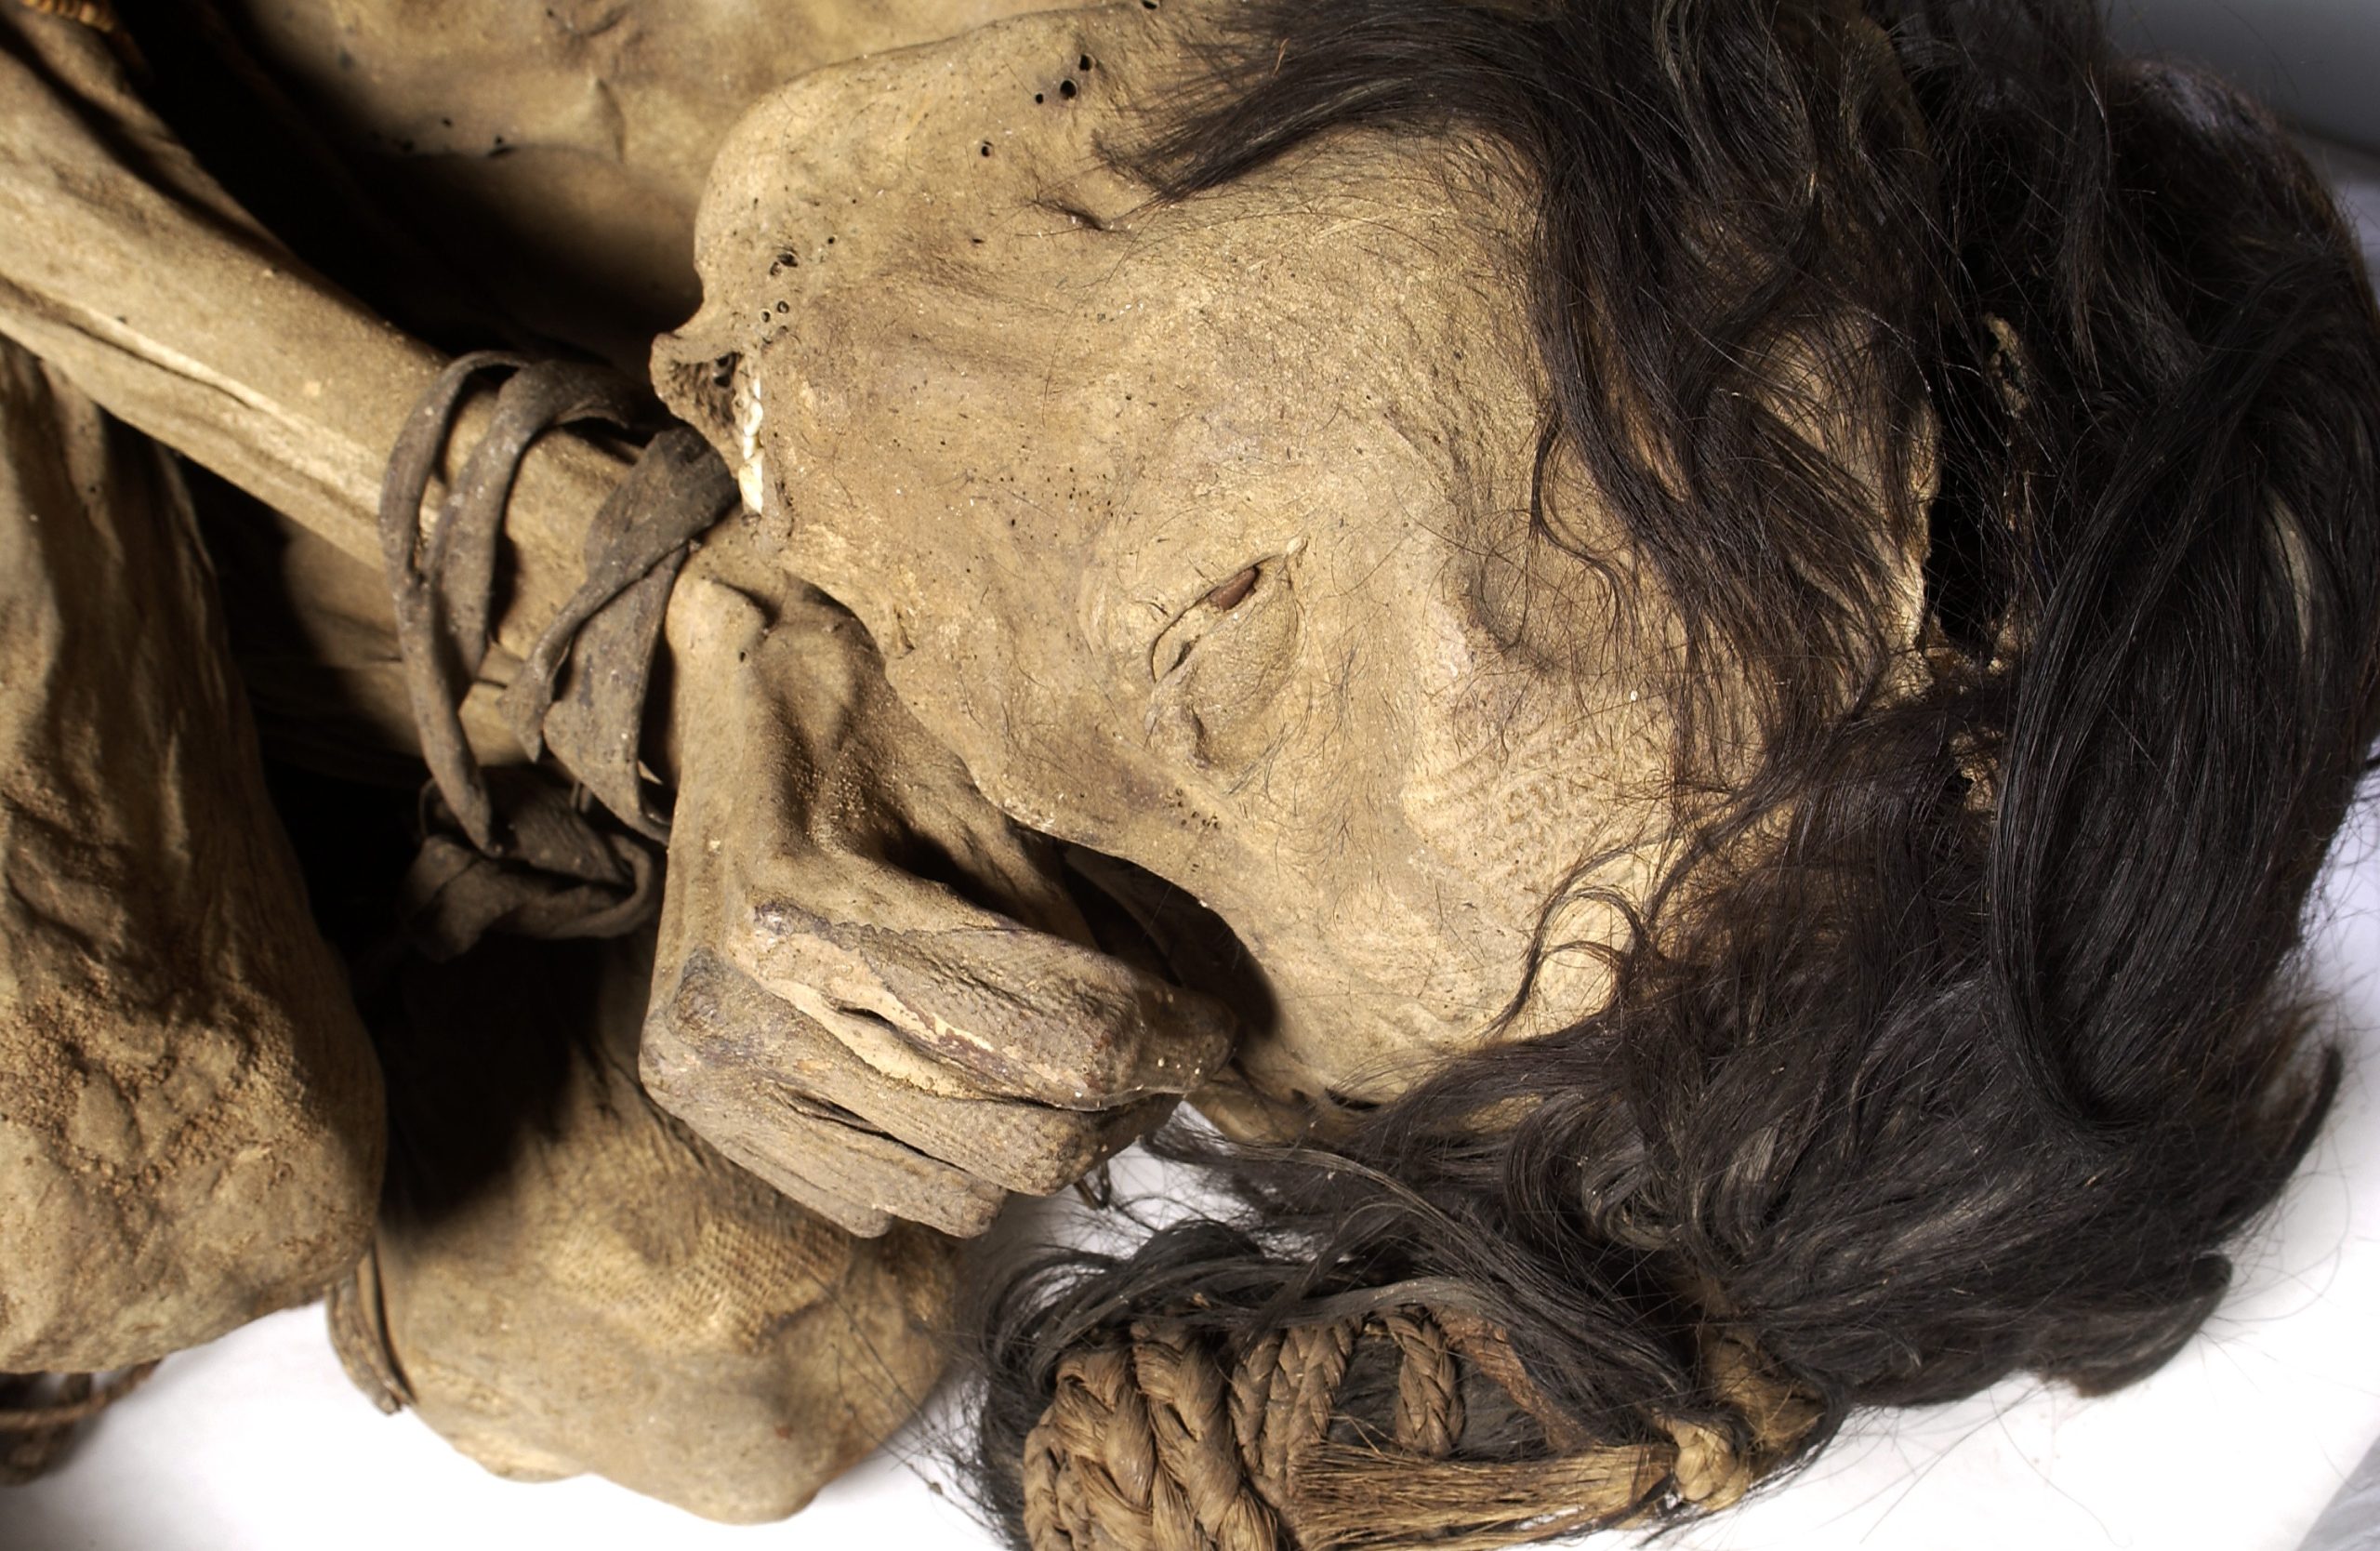 Journey into the Past: Decoding the Hidden Secrets of the Chimu Culture through the Fetal Mummy